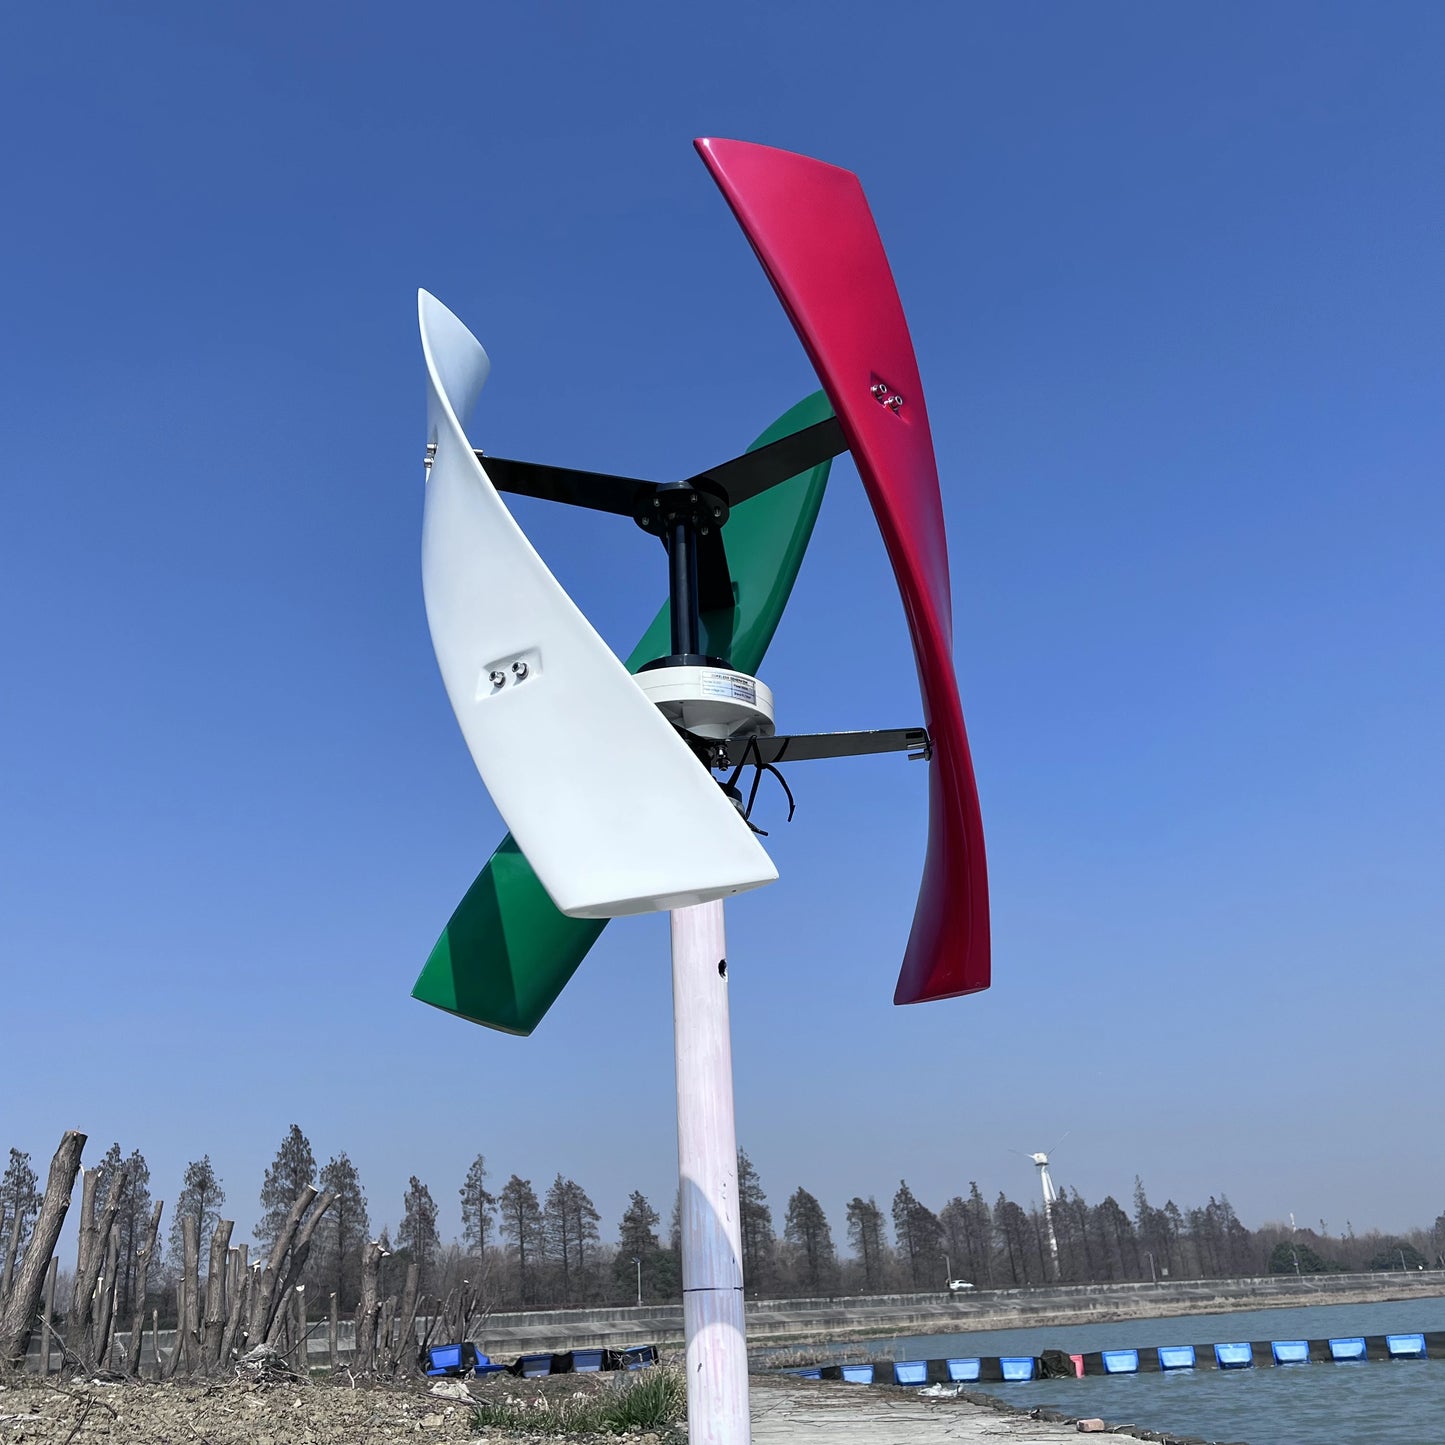 FLTXNY Power Factory Vertical Axis Windmill 4000W Permanent Magnet Wind Turbine Generator With MPPT Controller Off Grid Inverter